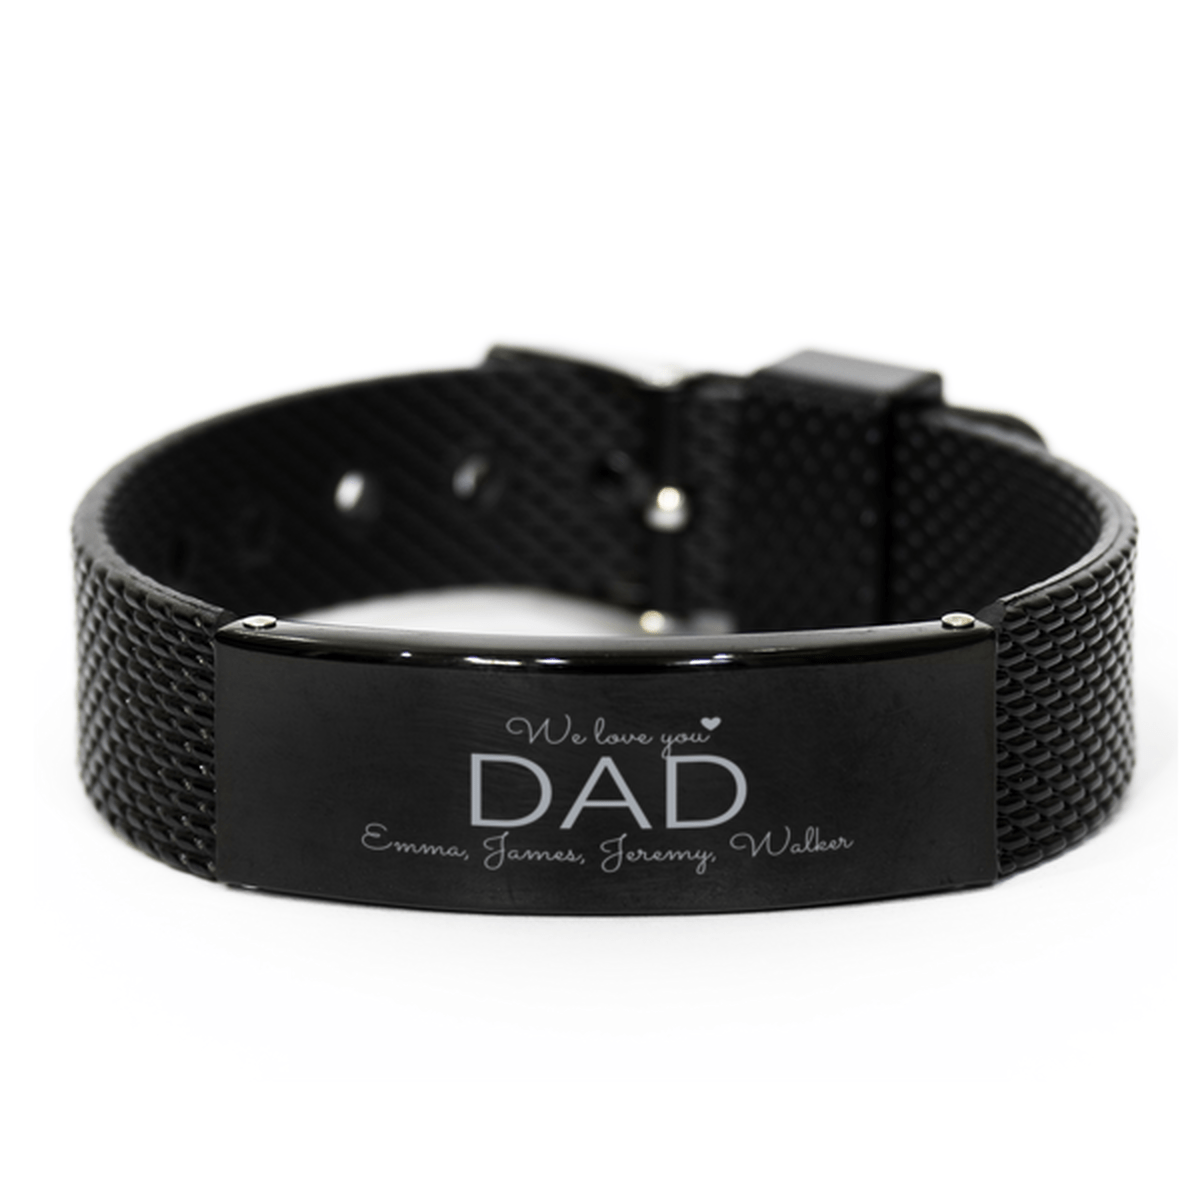 We Love you Dad bracelet, best gift for dad for christmas birthday fathers day